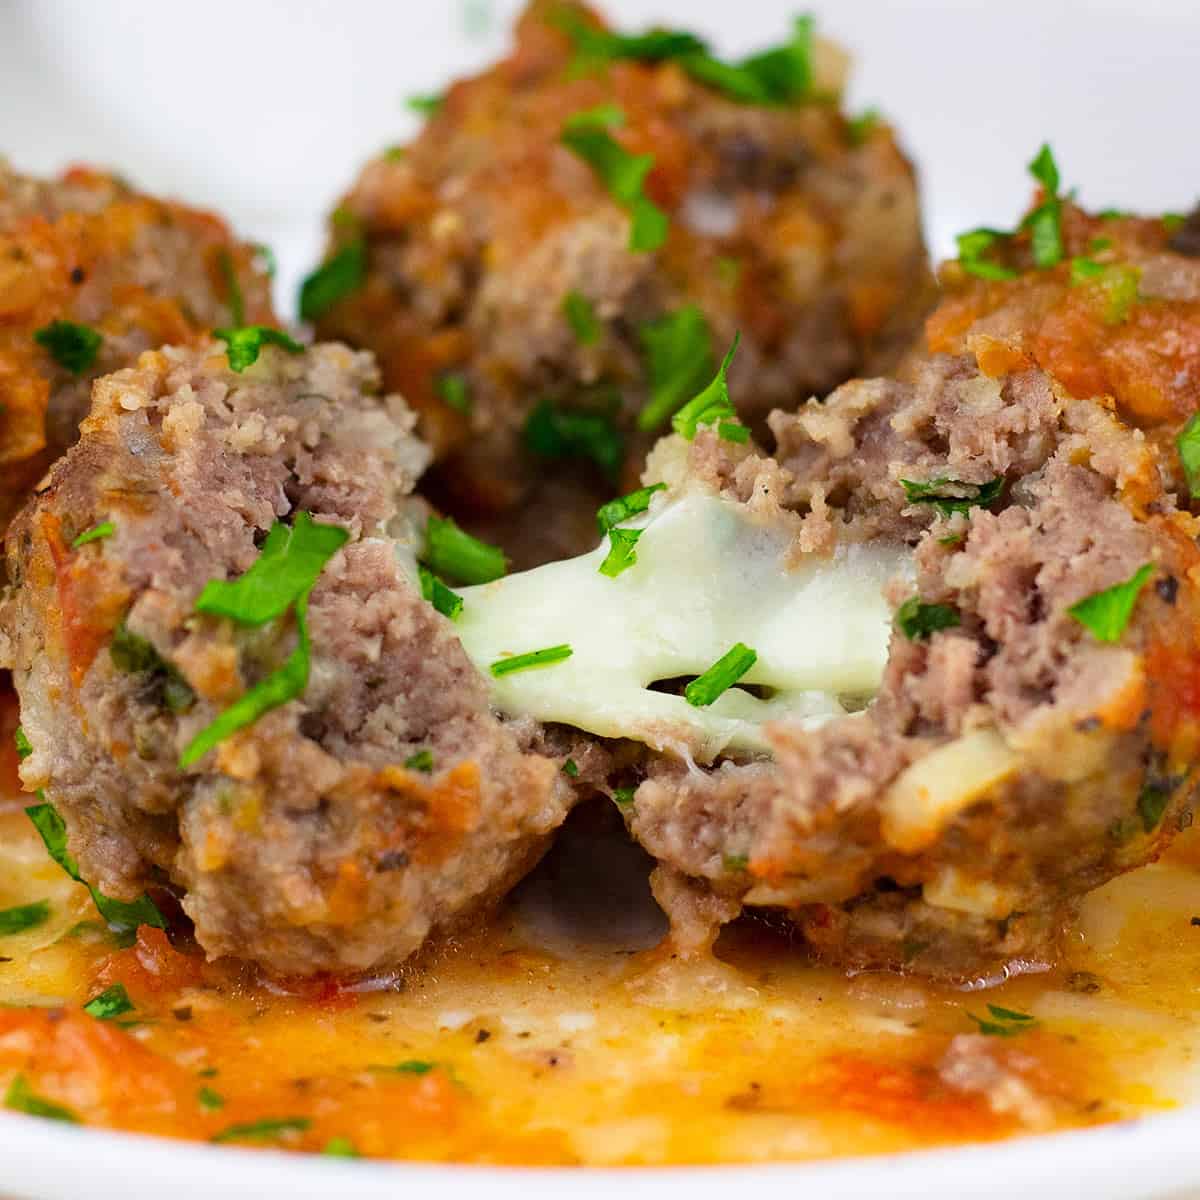 a plate full of meatballs and sauce where the front meatball is split open with mozzarella cheese pulls between the two halves